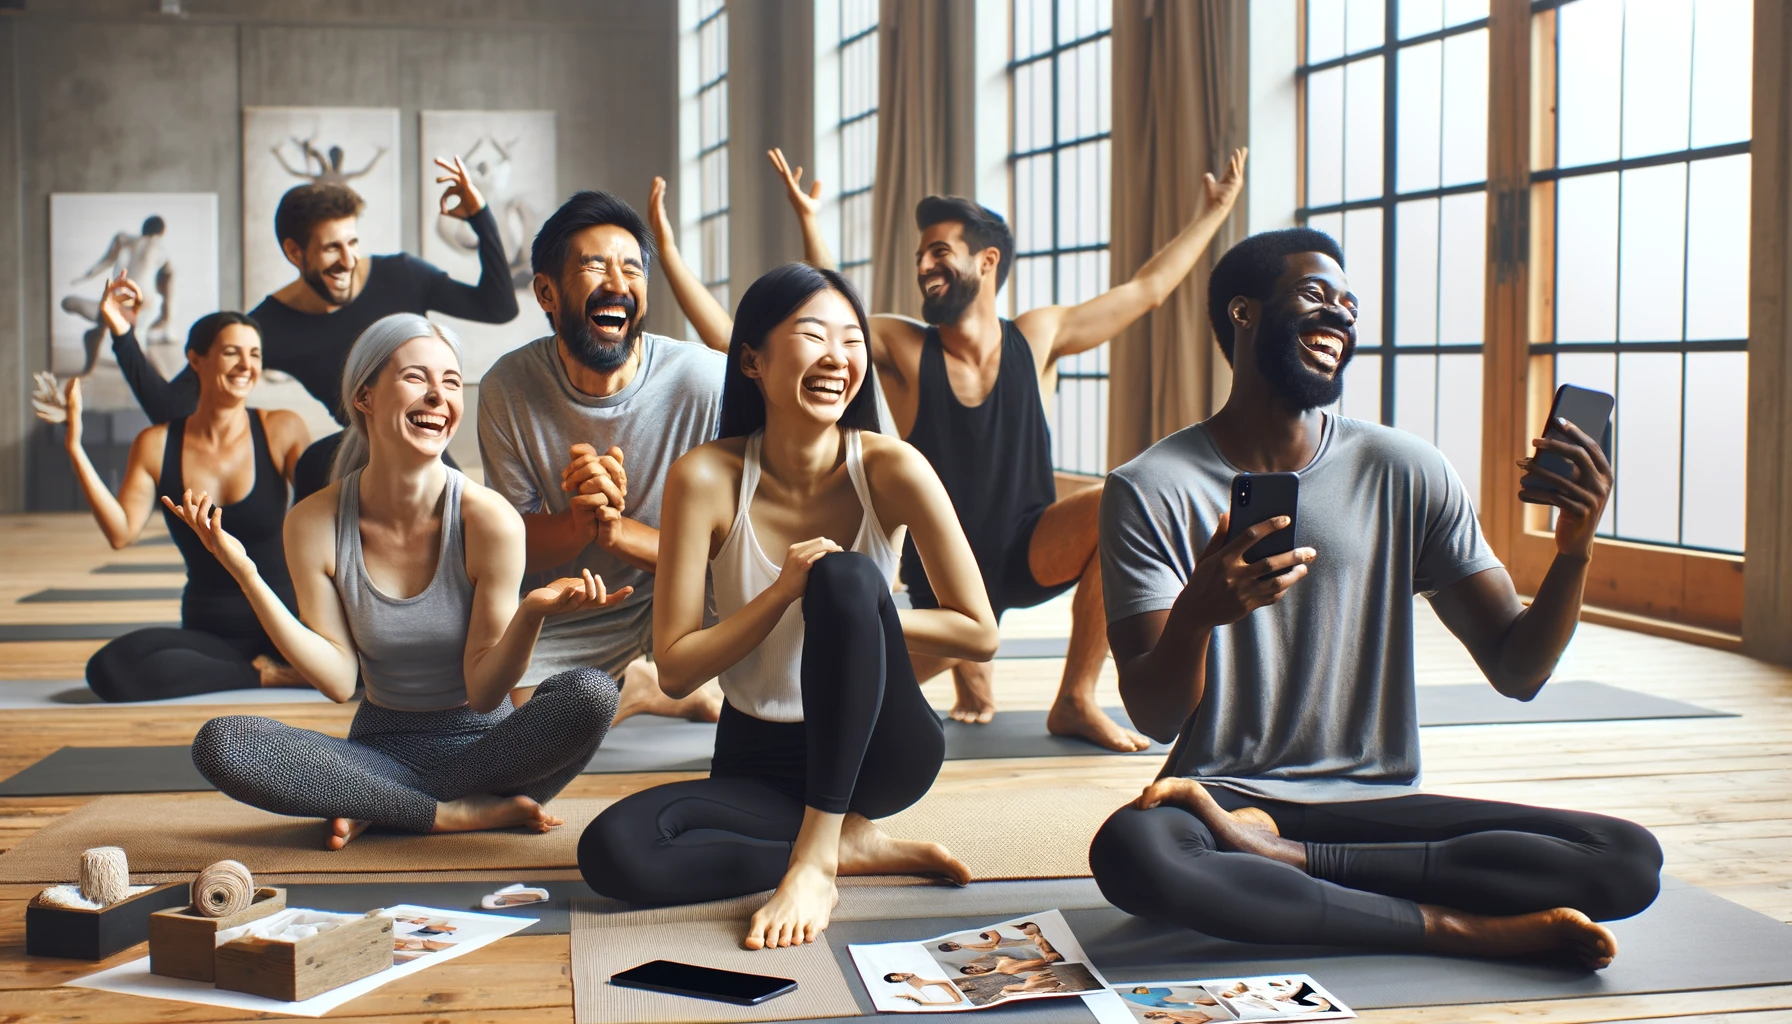 depicting diverse individuals in various yoga poses, laughing and sharing yoga memes on their digital devices, set in a peaceful yoga studio